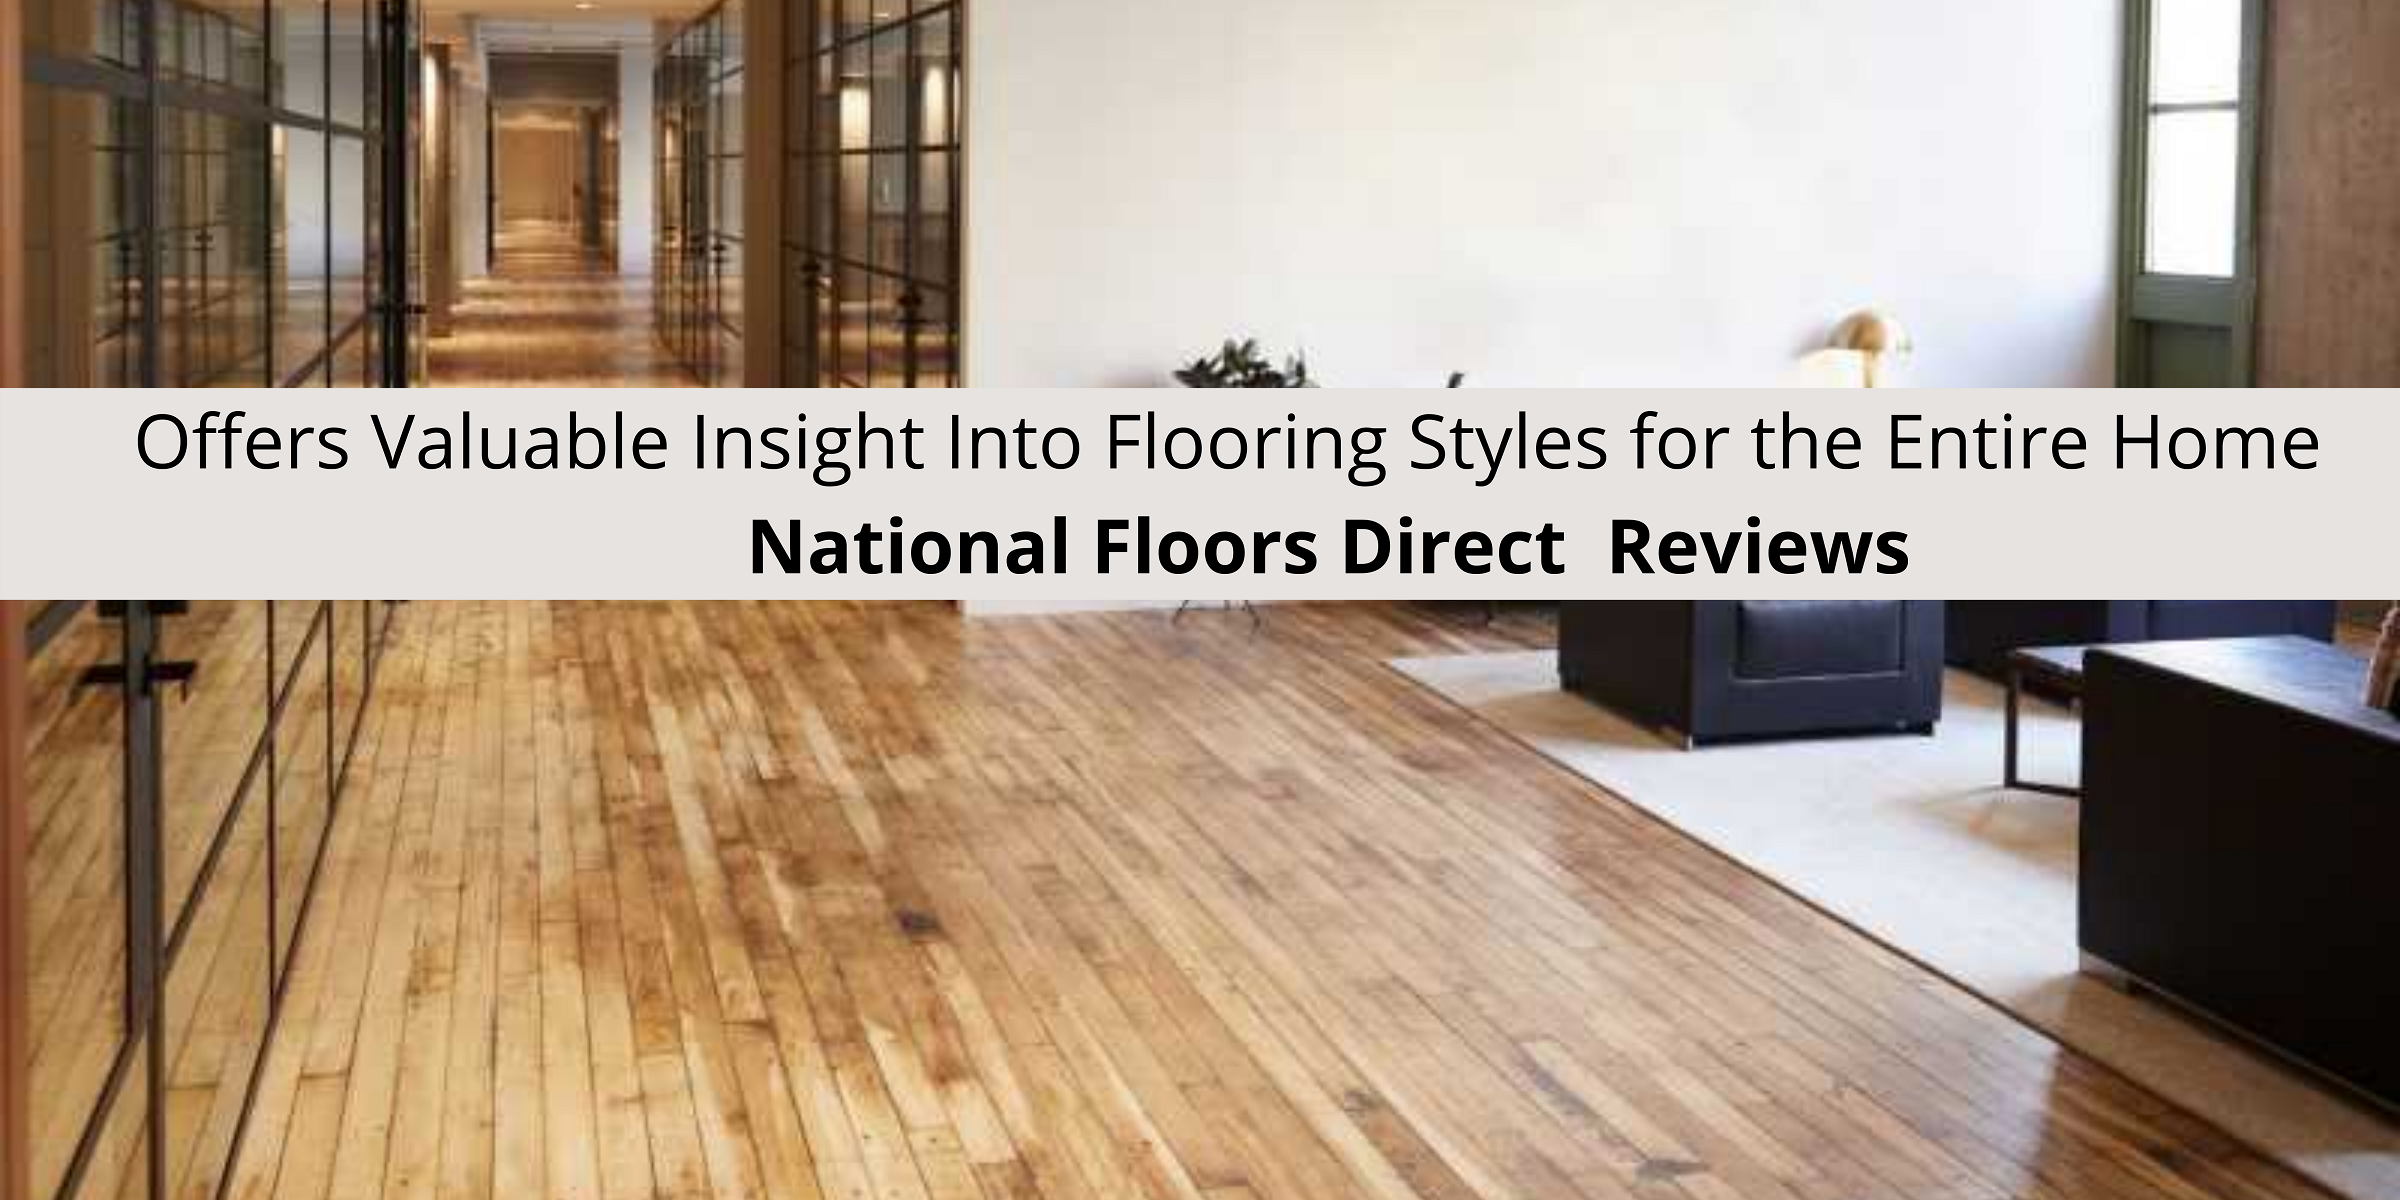 National Floors Direct Offers Valuable Insight Into Flooring Styles for the Entire Home